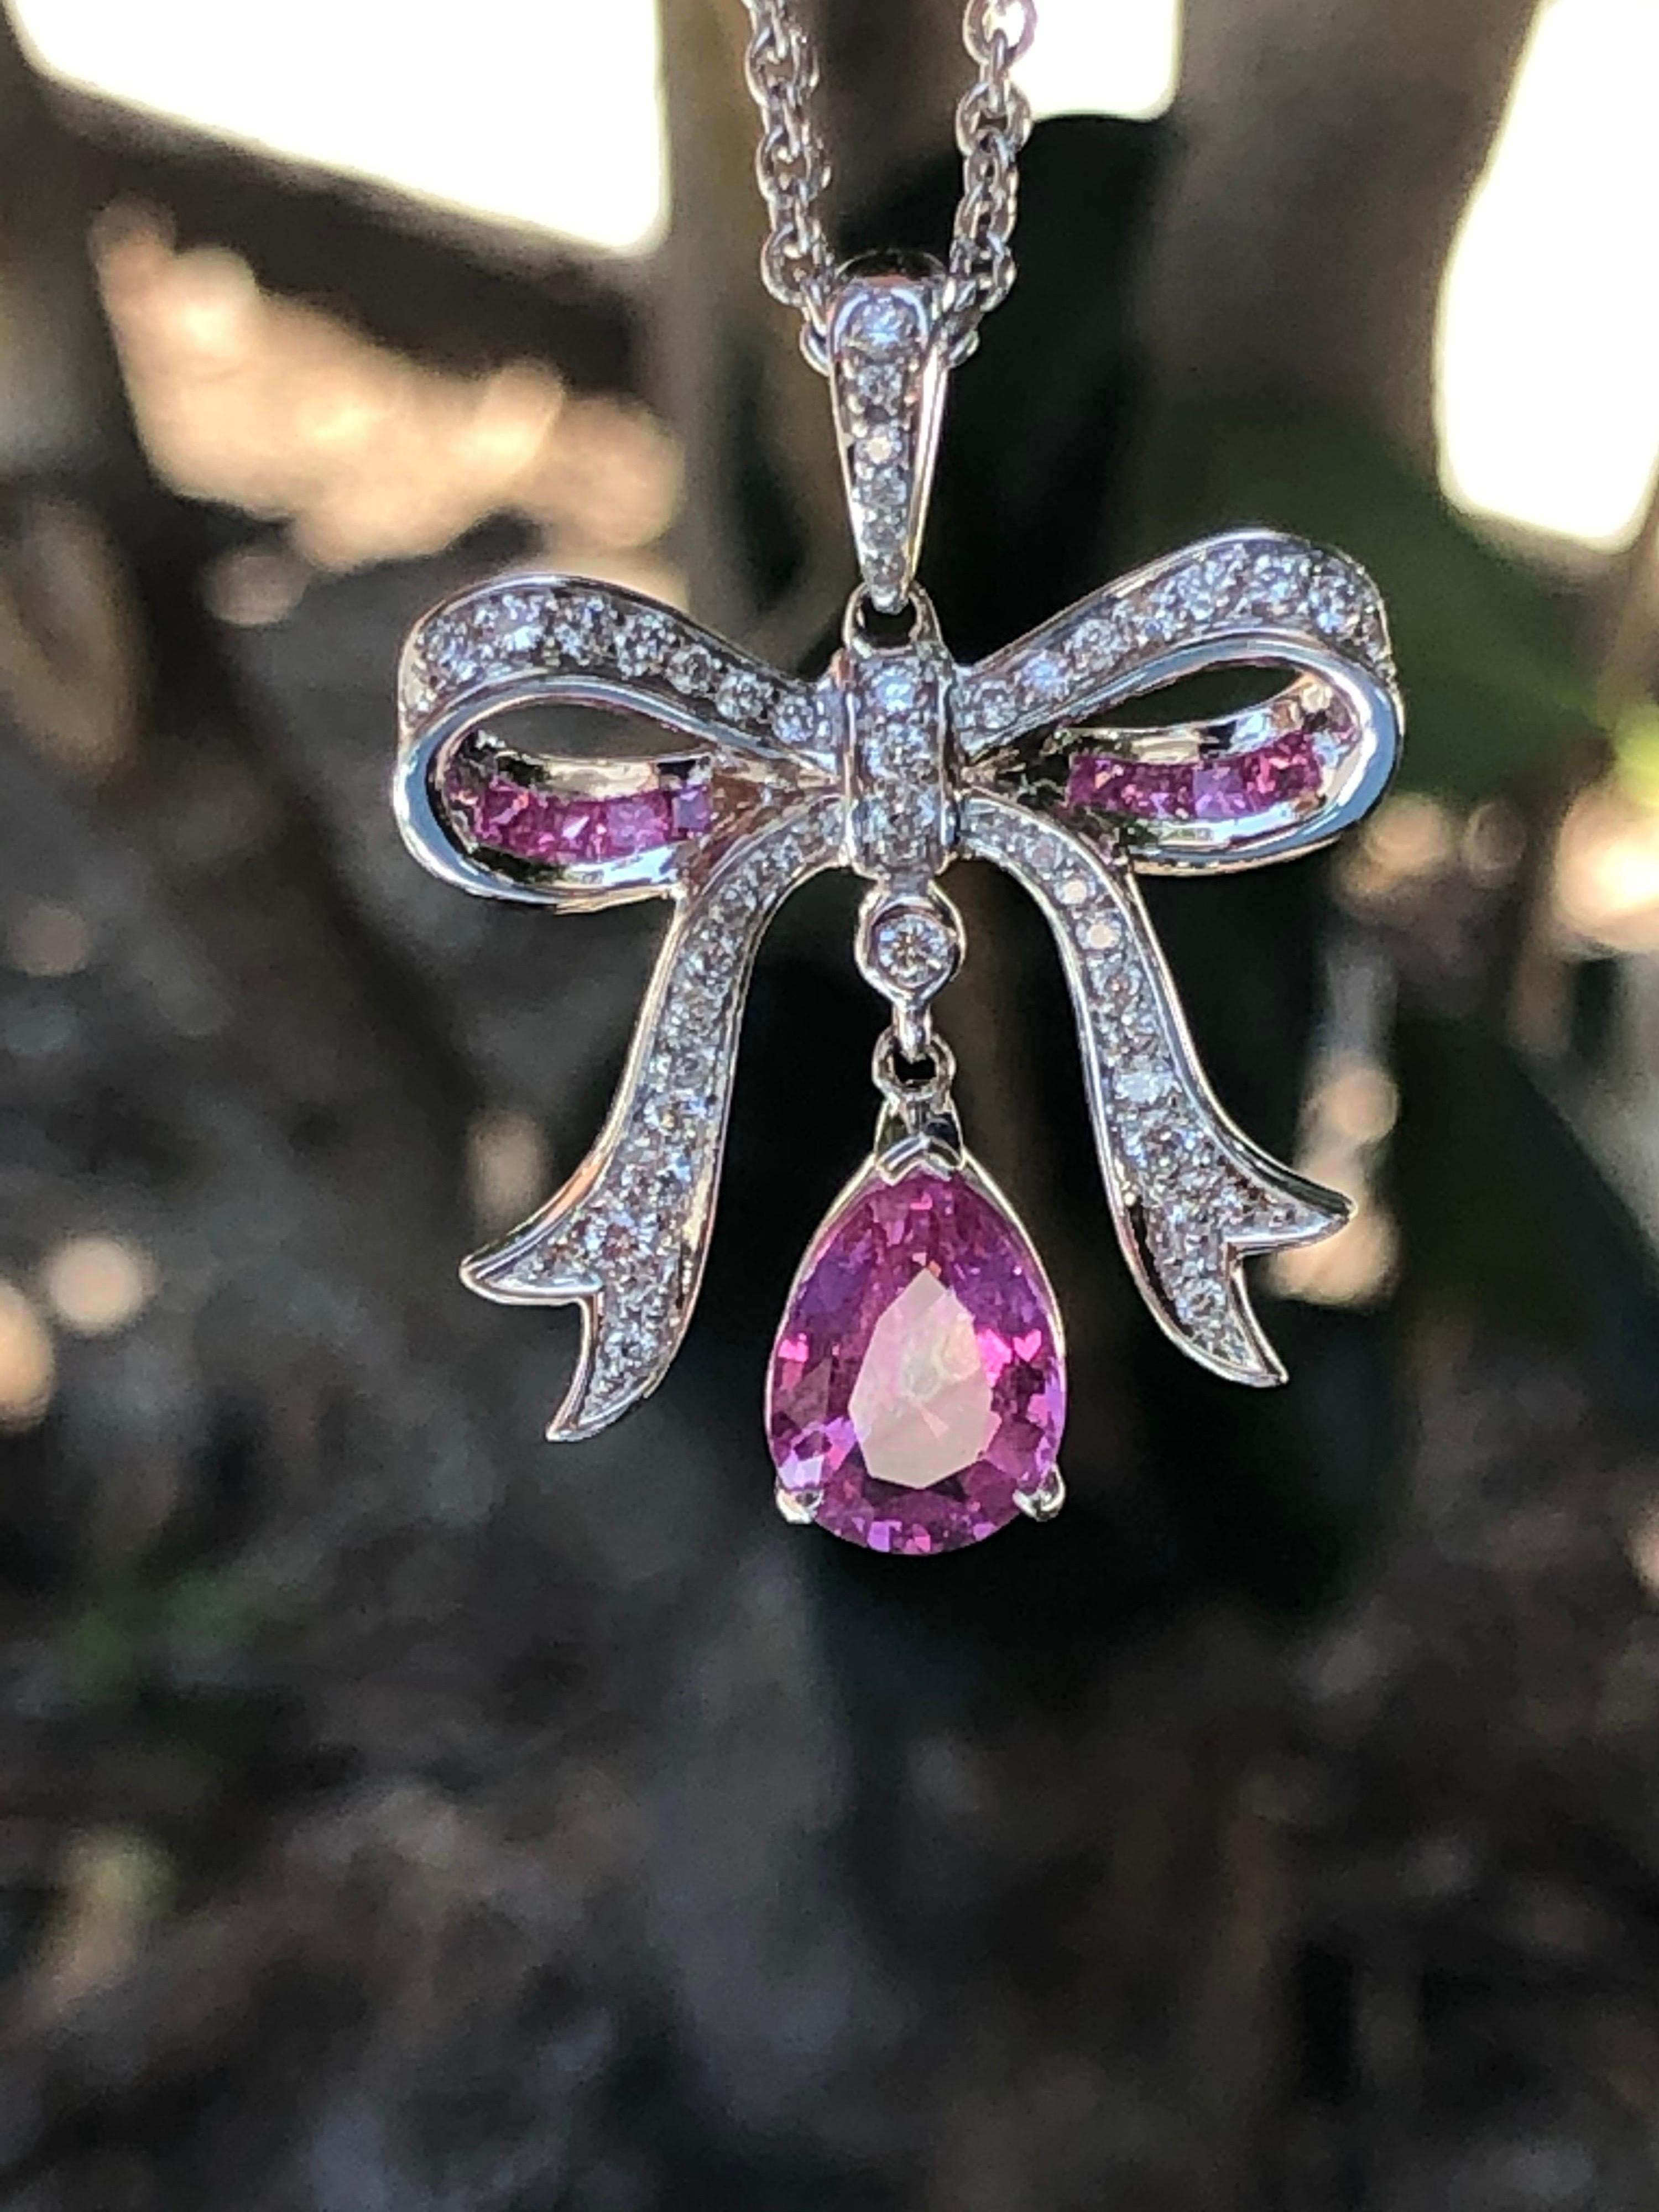 1.94 carat pear shaped Pink Sapphire is set in this 18K white gold pendant, adorned by 0.58 carats of square pink sapphires, and a total of 0.25 carats of round diamonds.
The chain length is 18